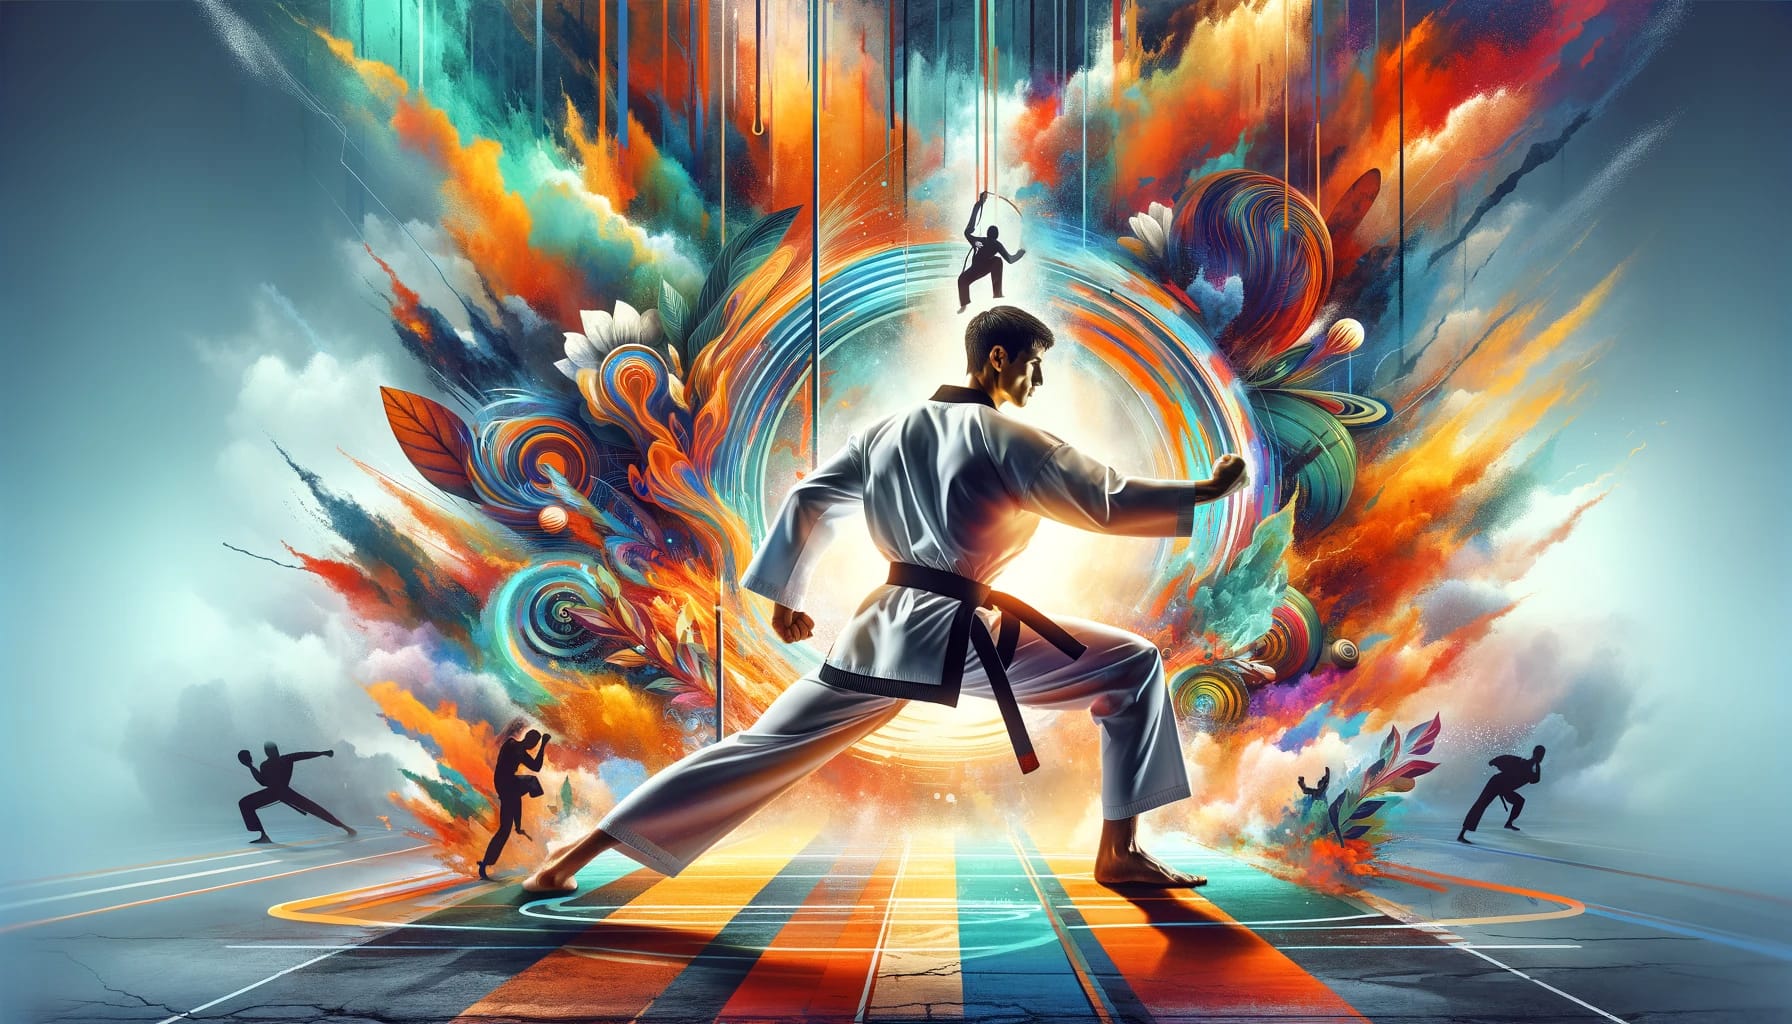 Dynamic representation of a person in a taekwondo stance, symbolizing the fusion of fitness and martial arts mastery, with vibrant colors emphasizing strength, health, and community.